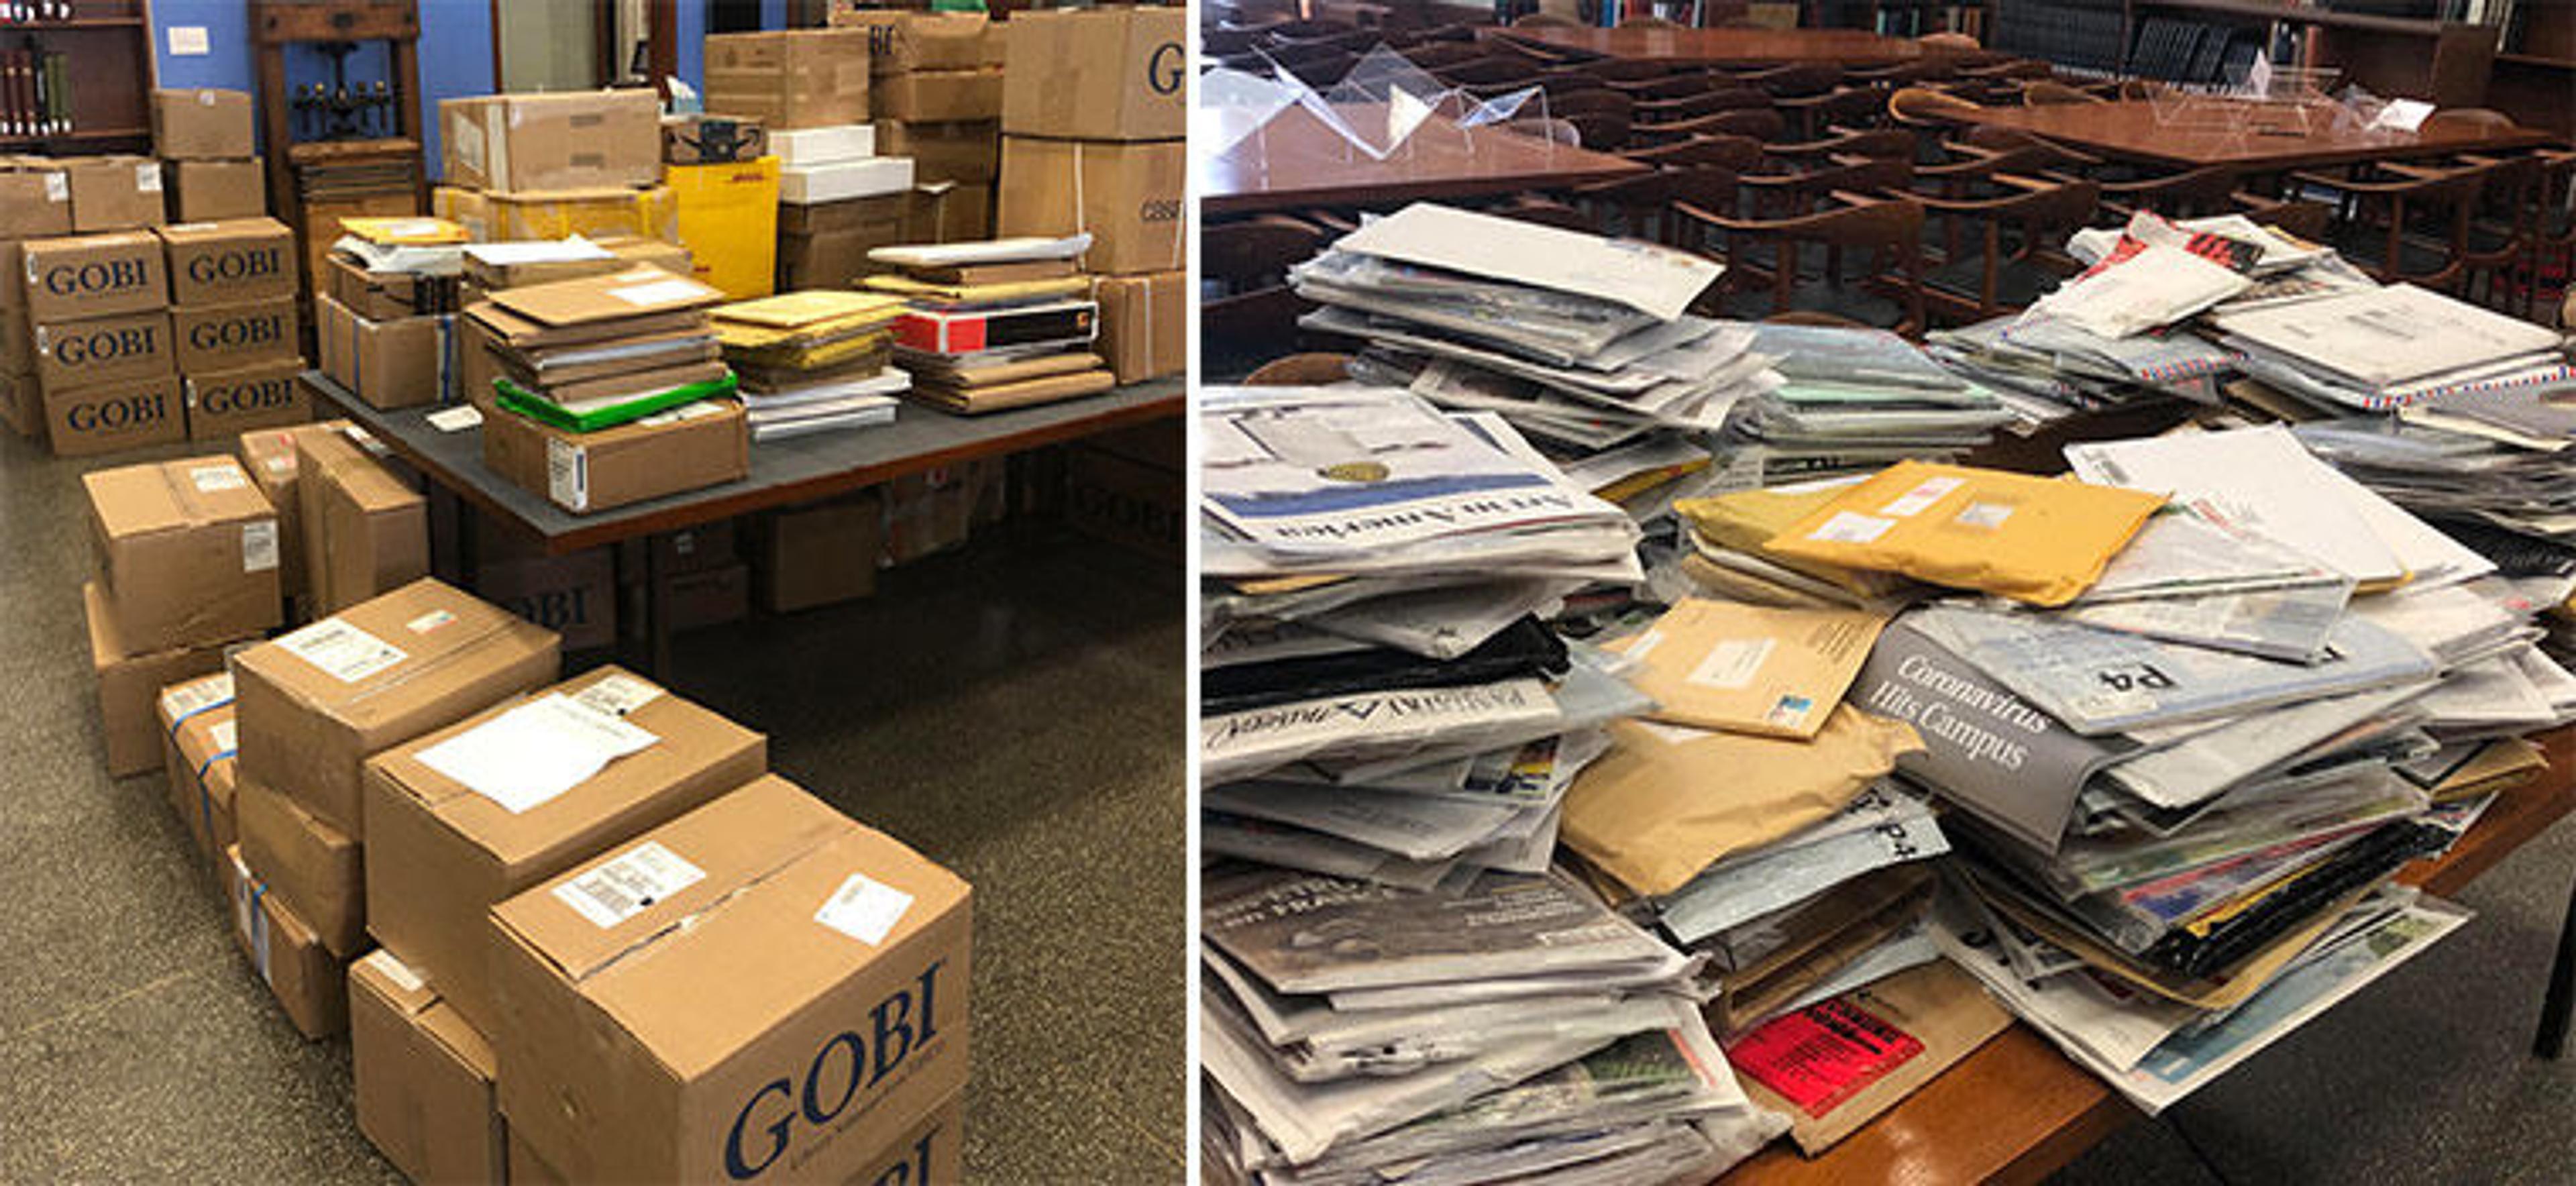 Two images of huge piles of boxes and periodicals that had been piling up in the library throughout the pandemic